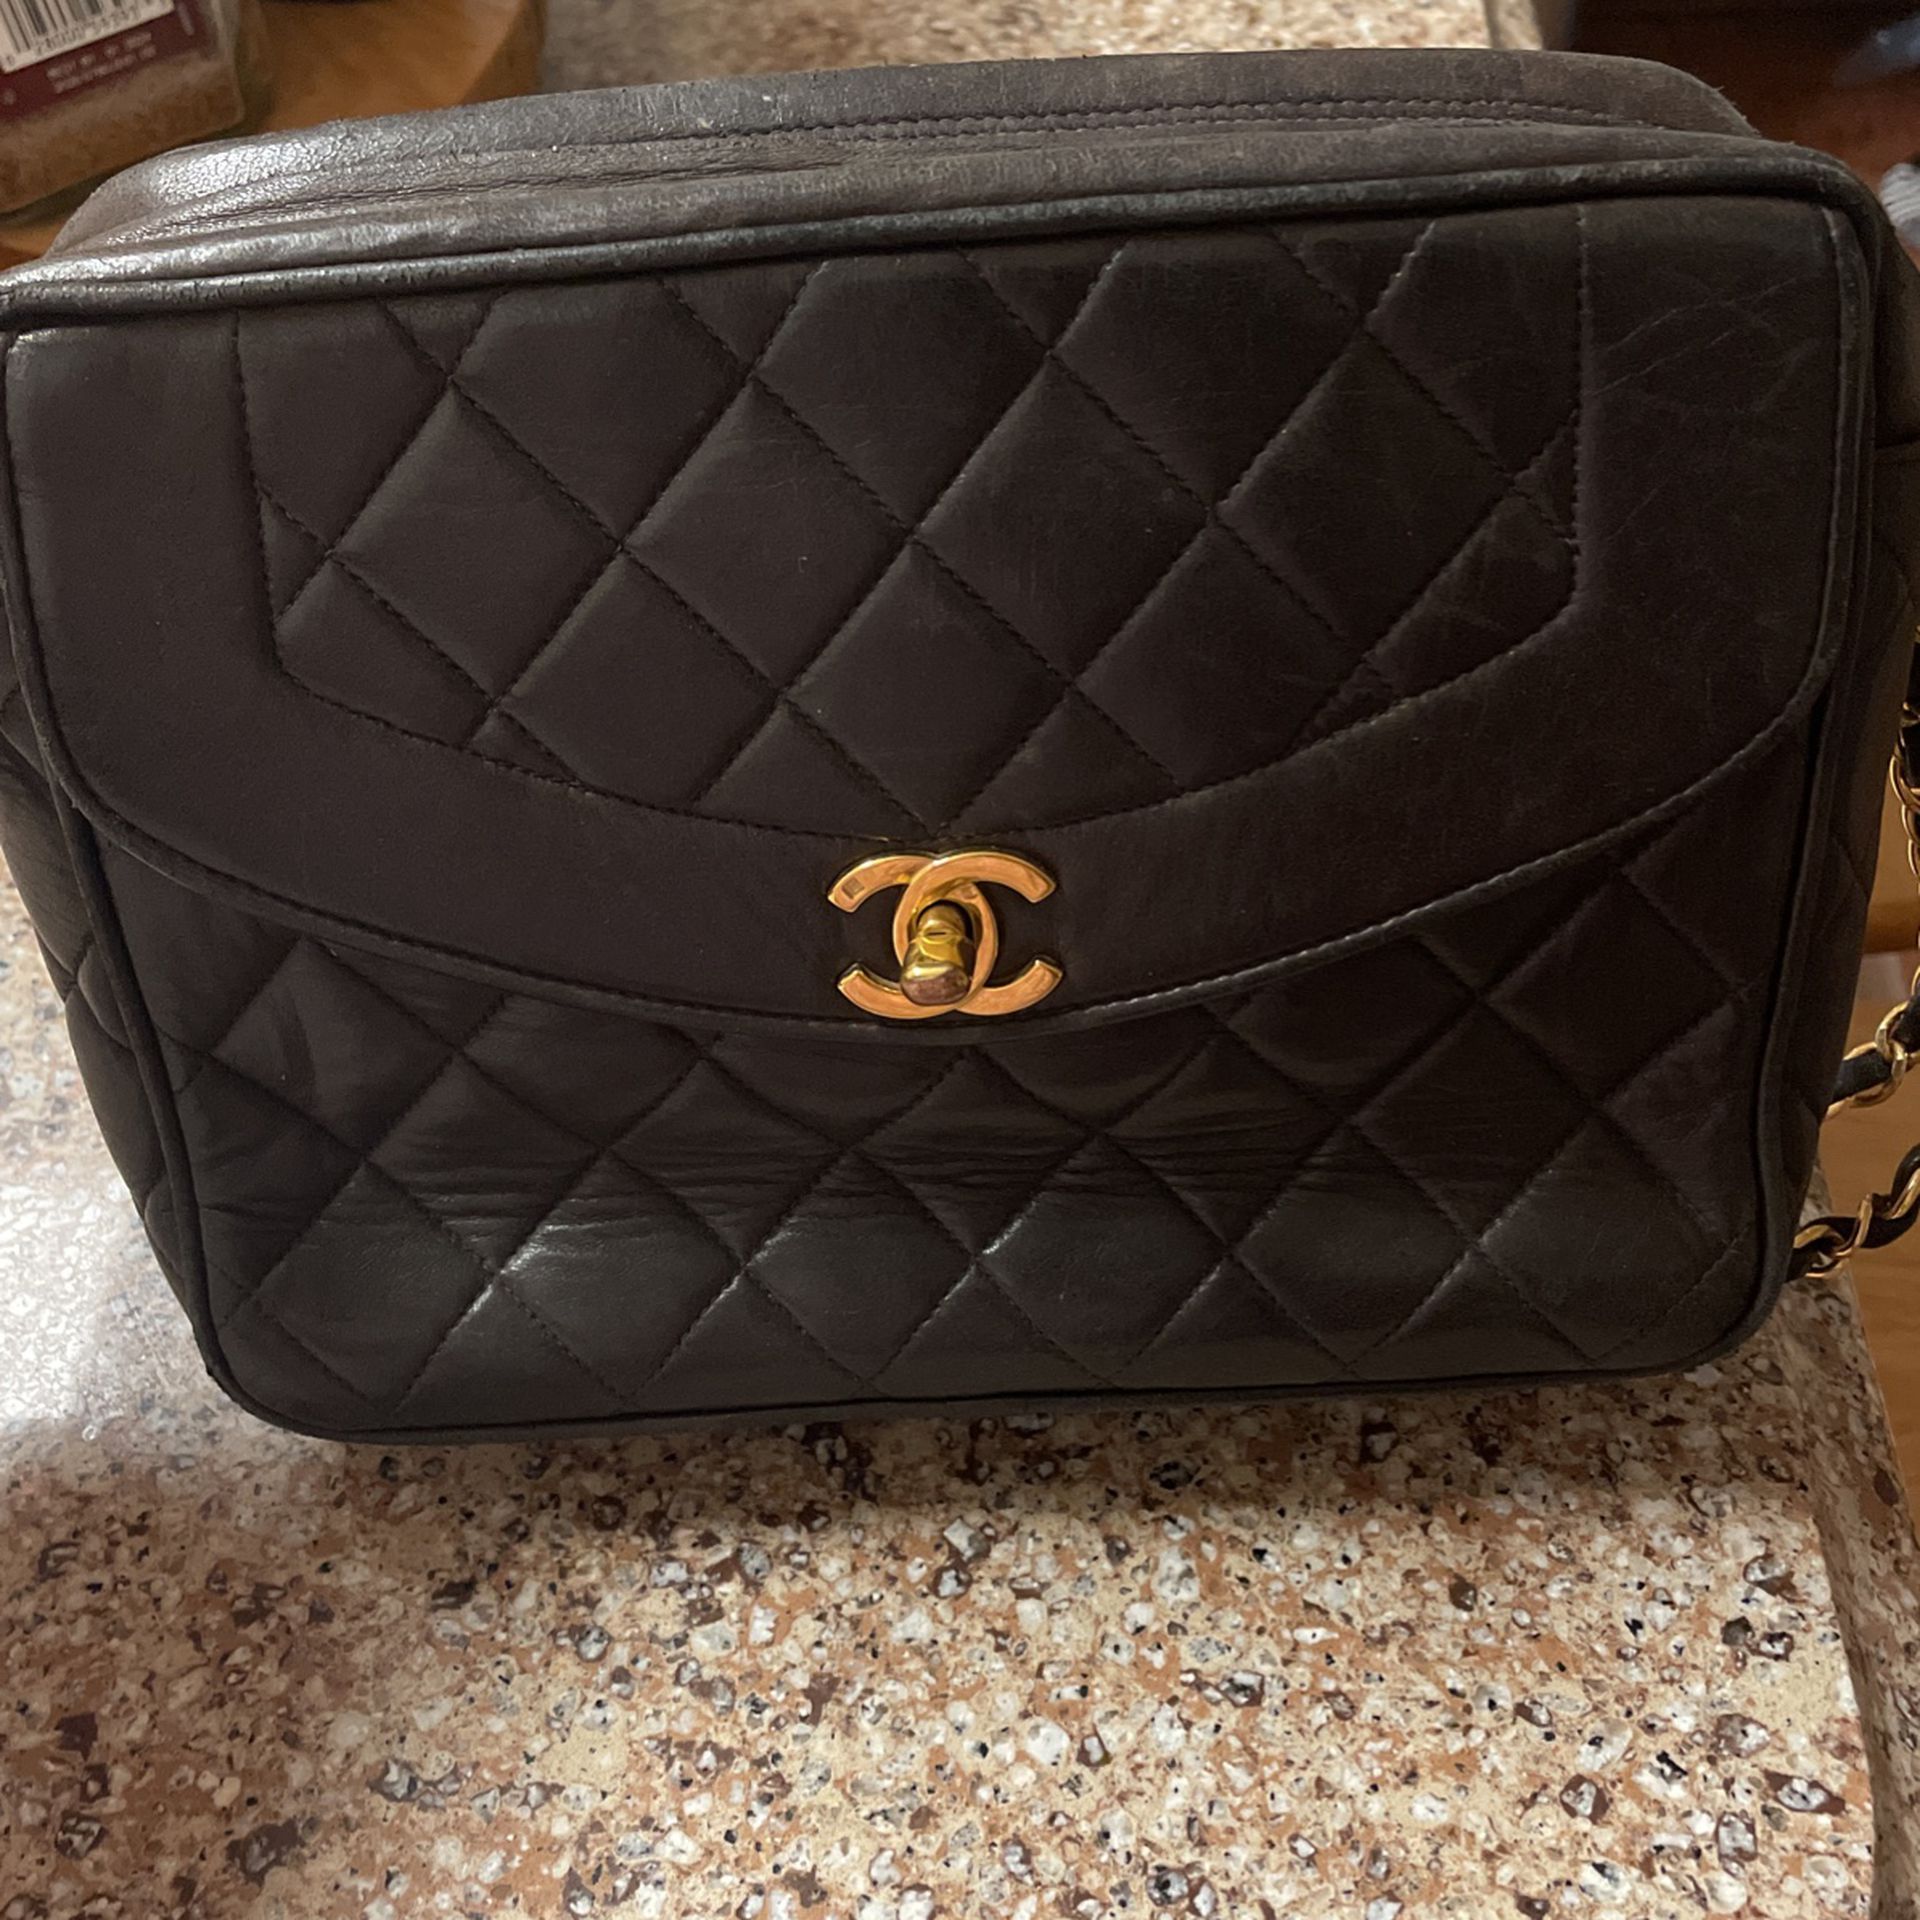 Used Chanel Bag Good Condition Real Leather leather